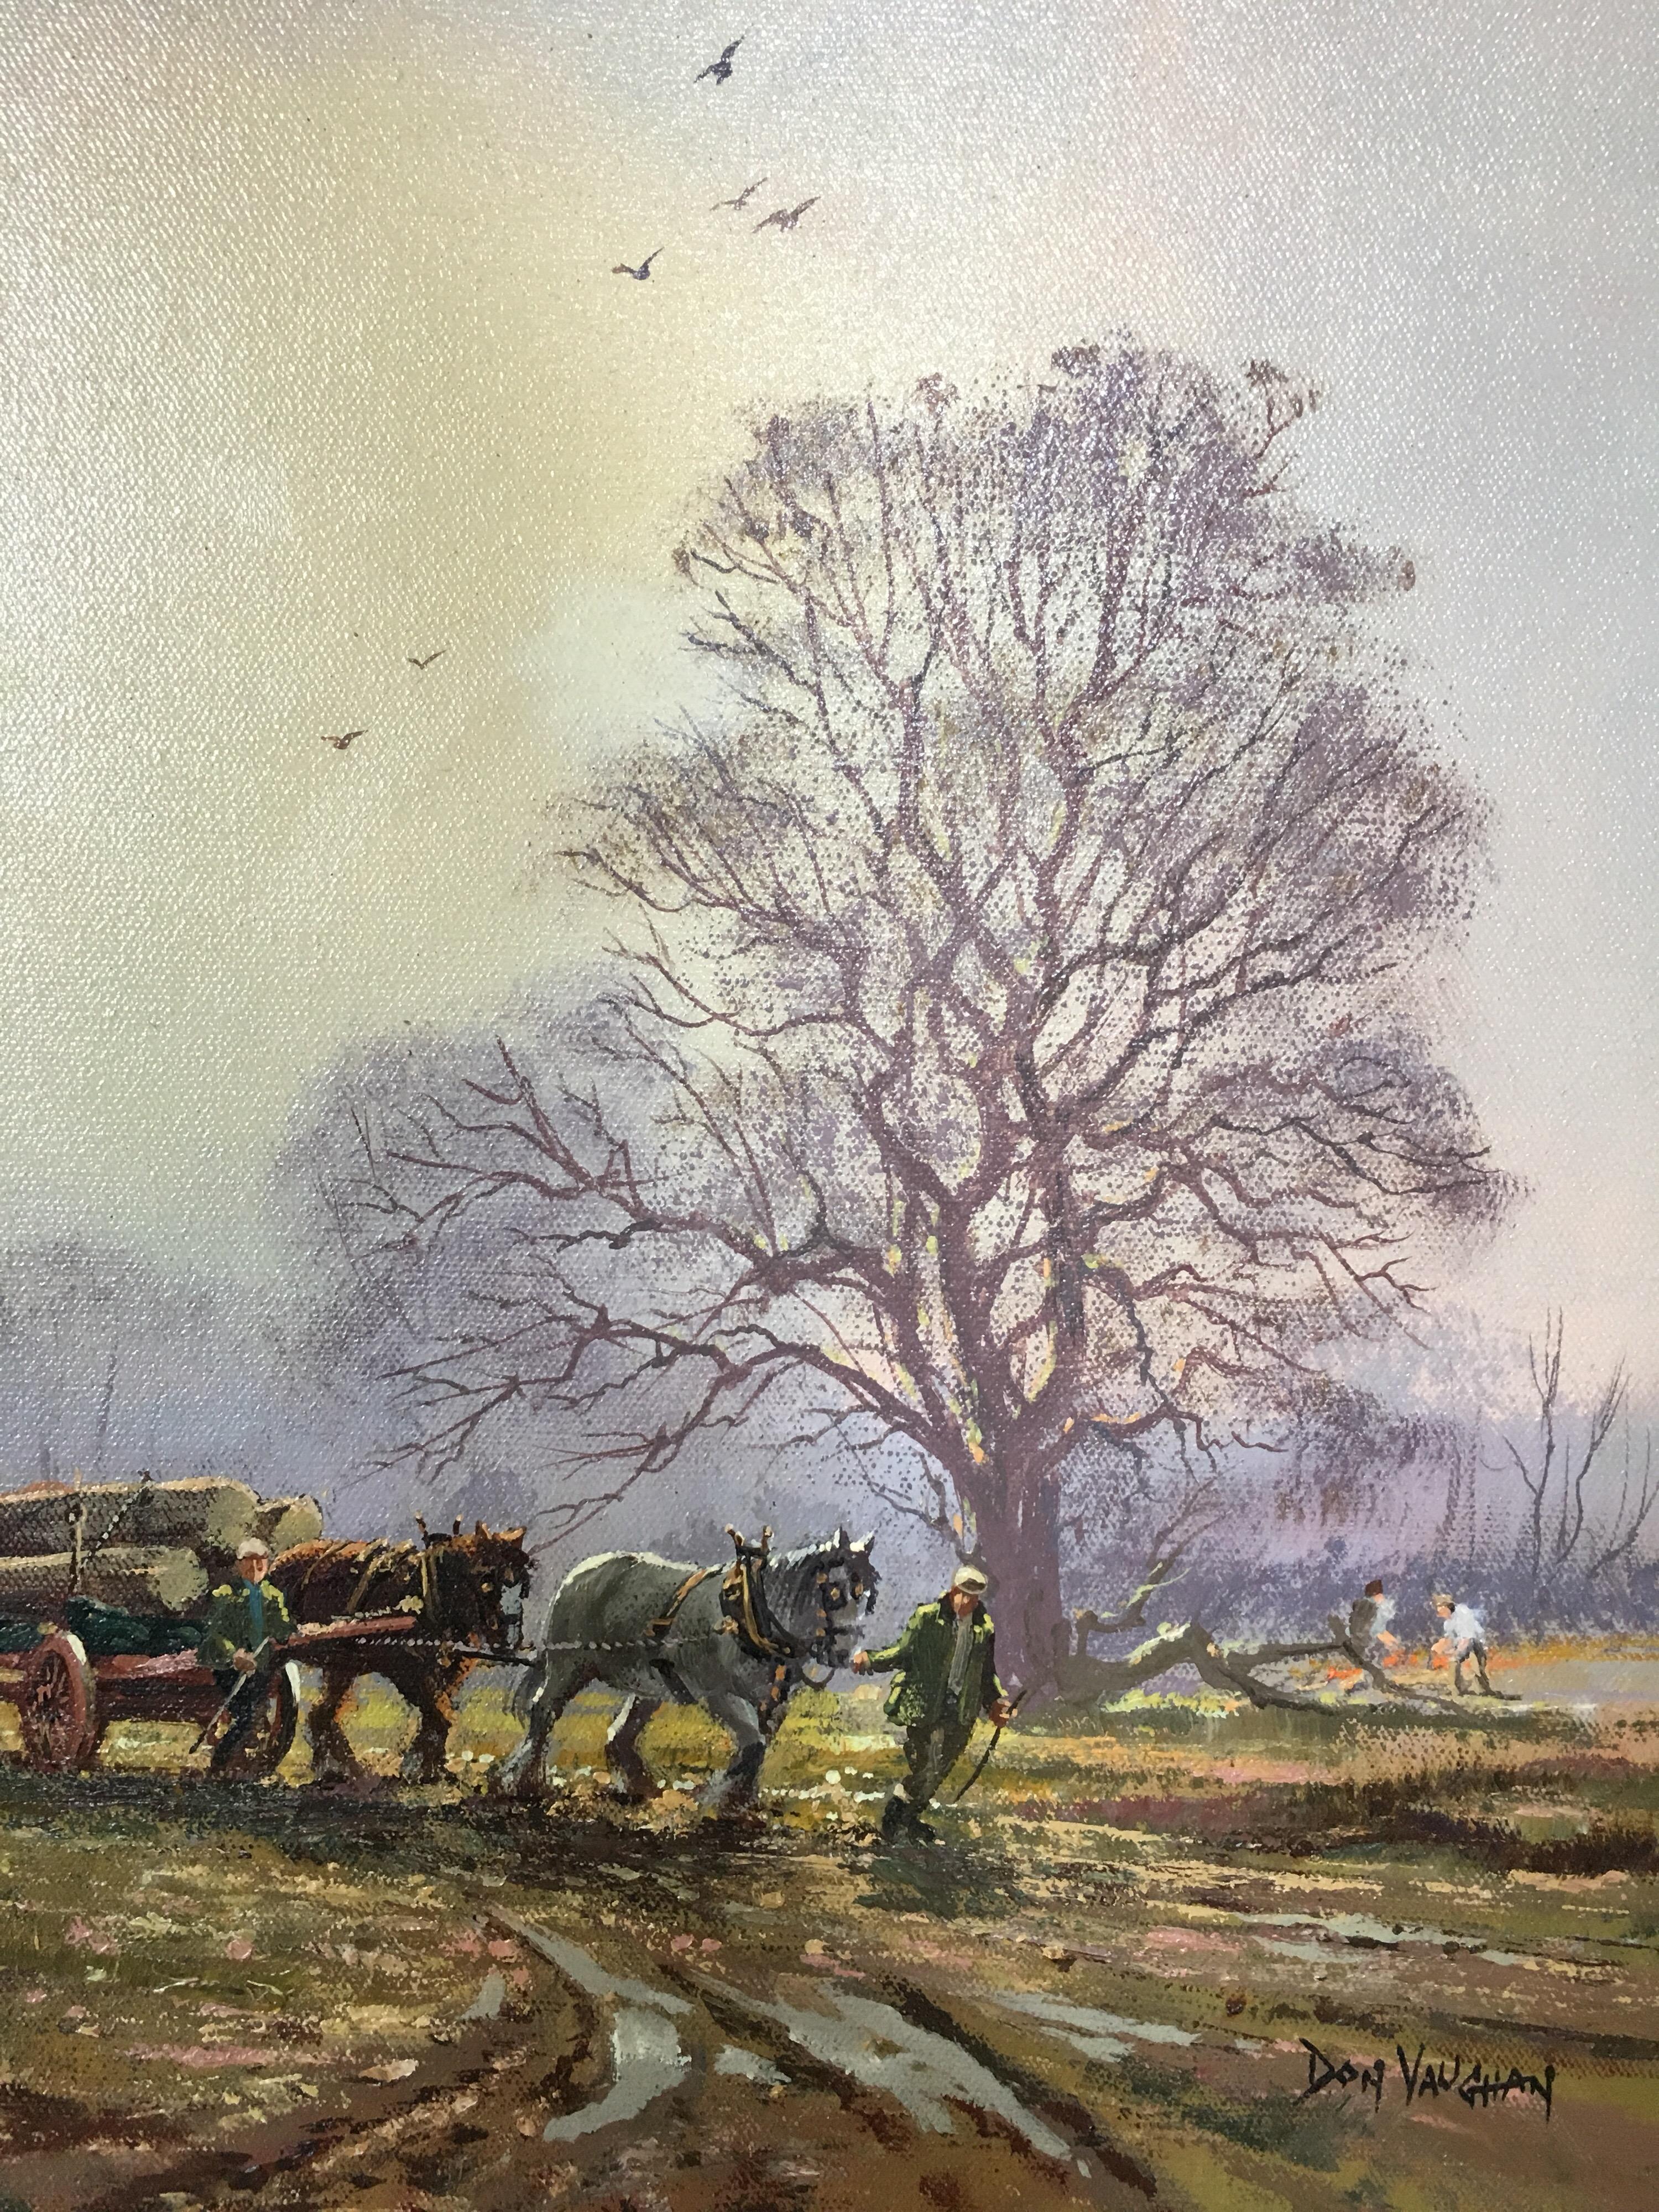 The Logging Team
By Don Vaughan, British artist, 20th Century
Oil painting on canvas, framed
Signed by the artist on the lower right hand corner
Frame size: 21 x 29 inches

Fine large scale English river landscape signed oil painting by Don Vaughan.